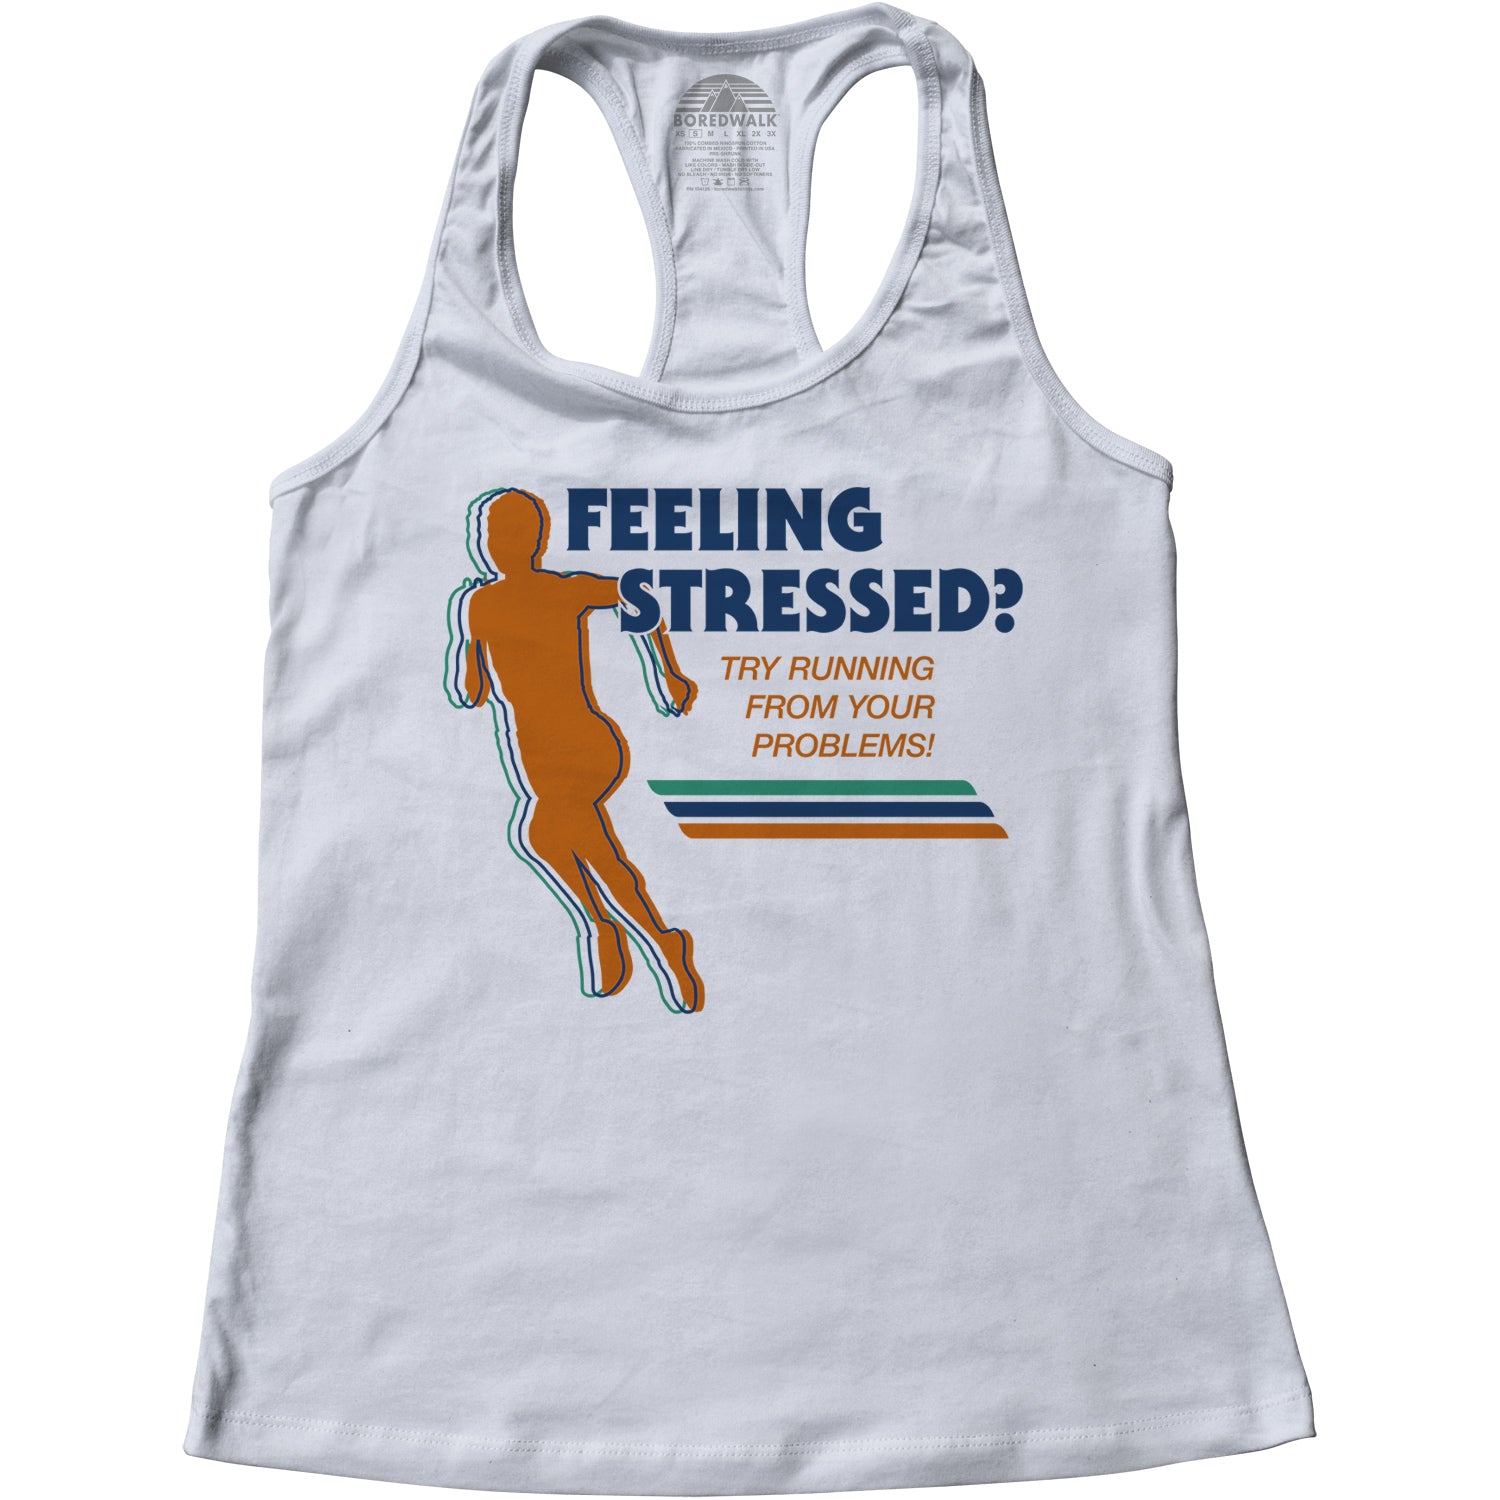 Women's Feeling Stressed? Try Running from Your Problems Racerback Tank Top